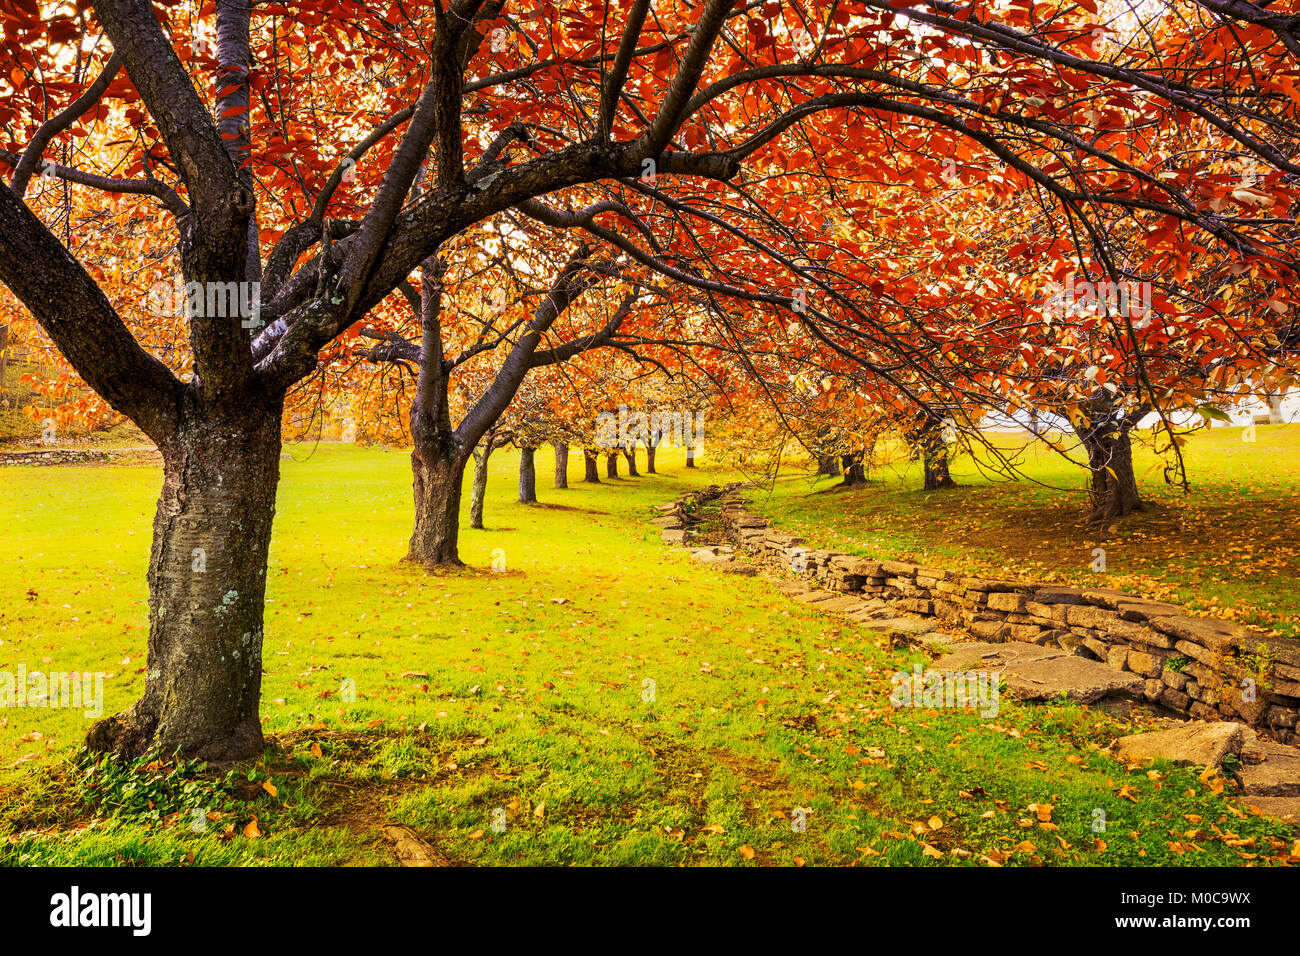 Autumn in Hurd Park, Dover, New Jersey with fall foliage on cherry trees. Stock Photo